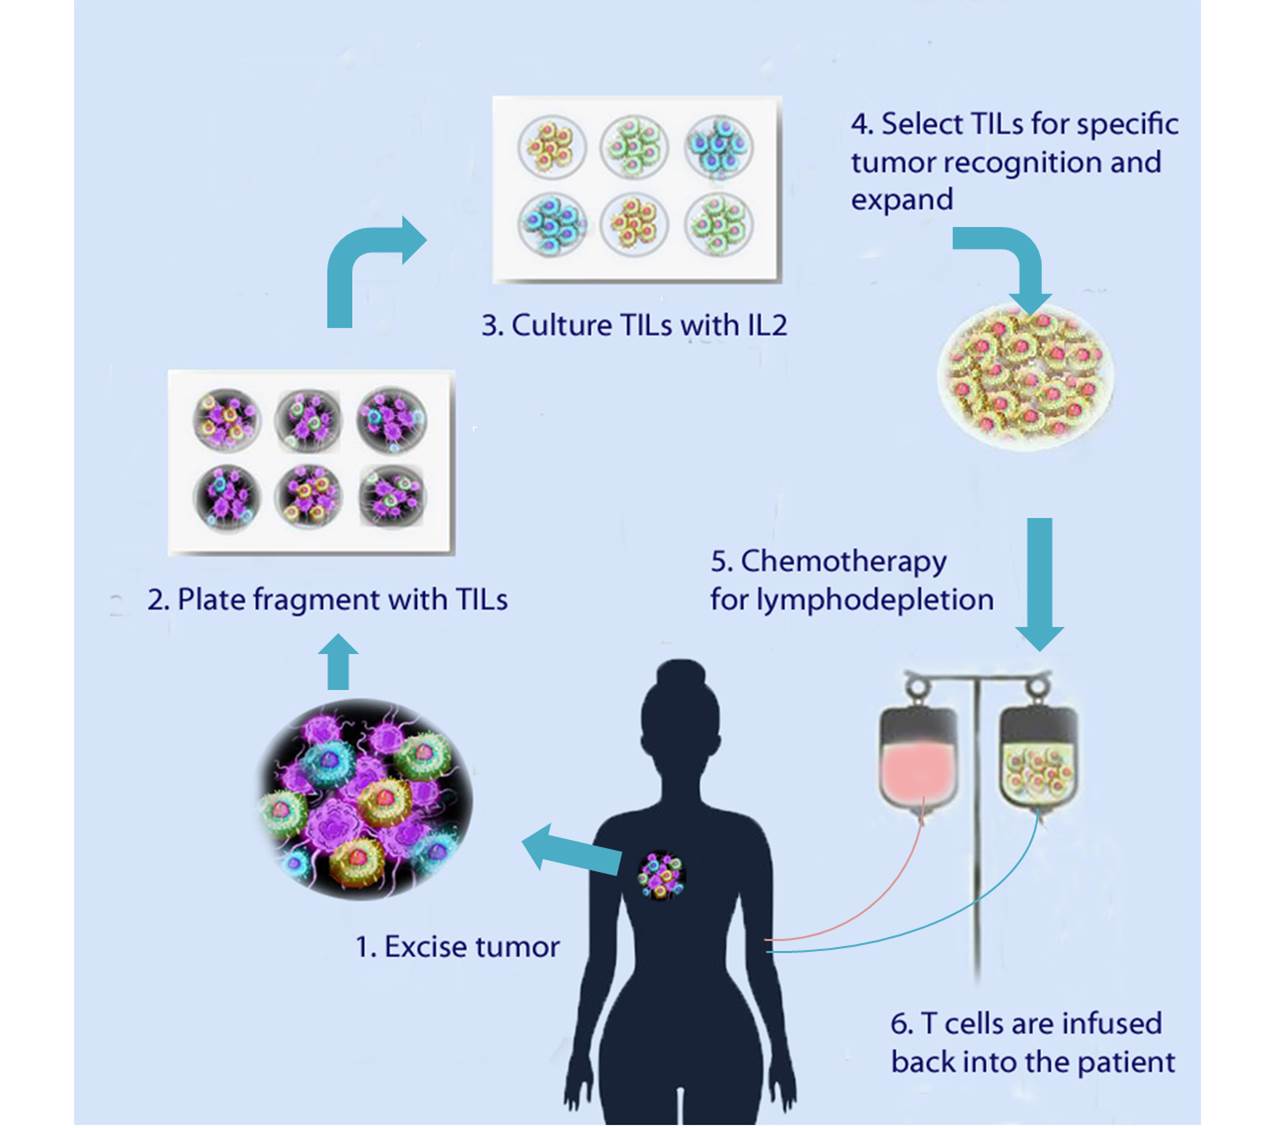 Adoptive cell therapies for cancer